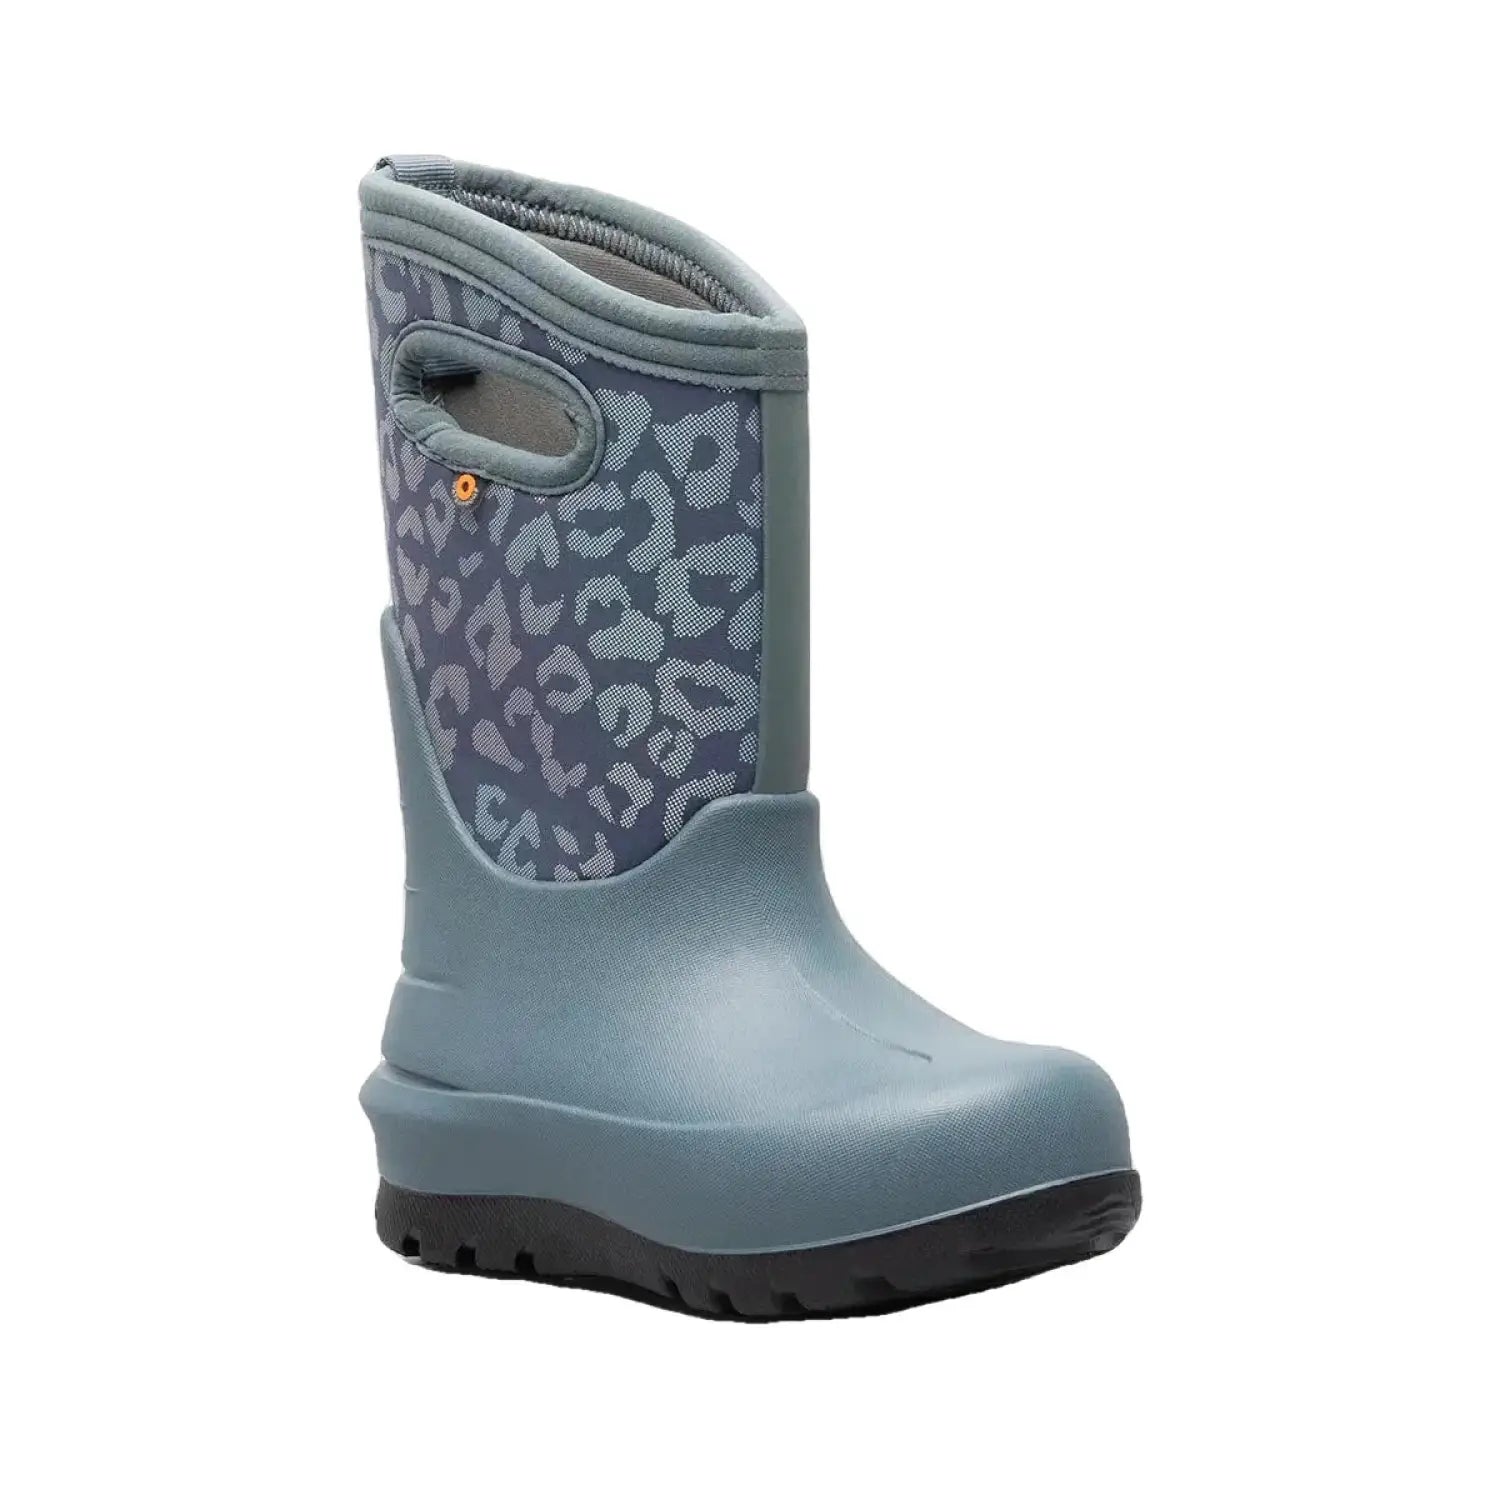 BOGS K's Neo Classic Metallic Leopard, Misty Grey, front and side view 